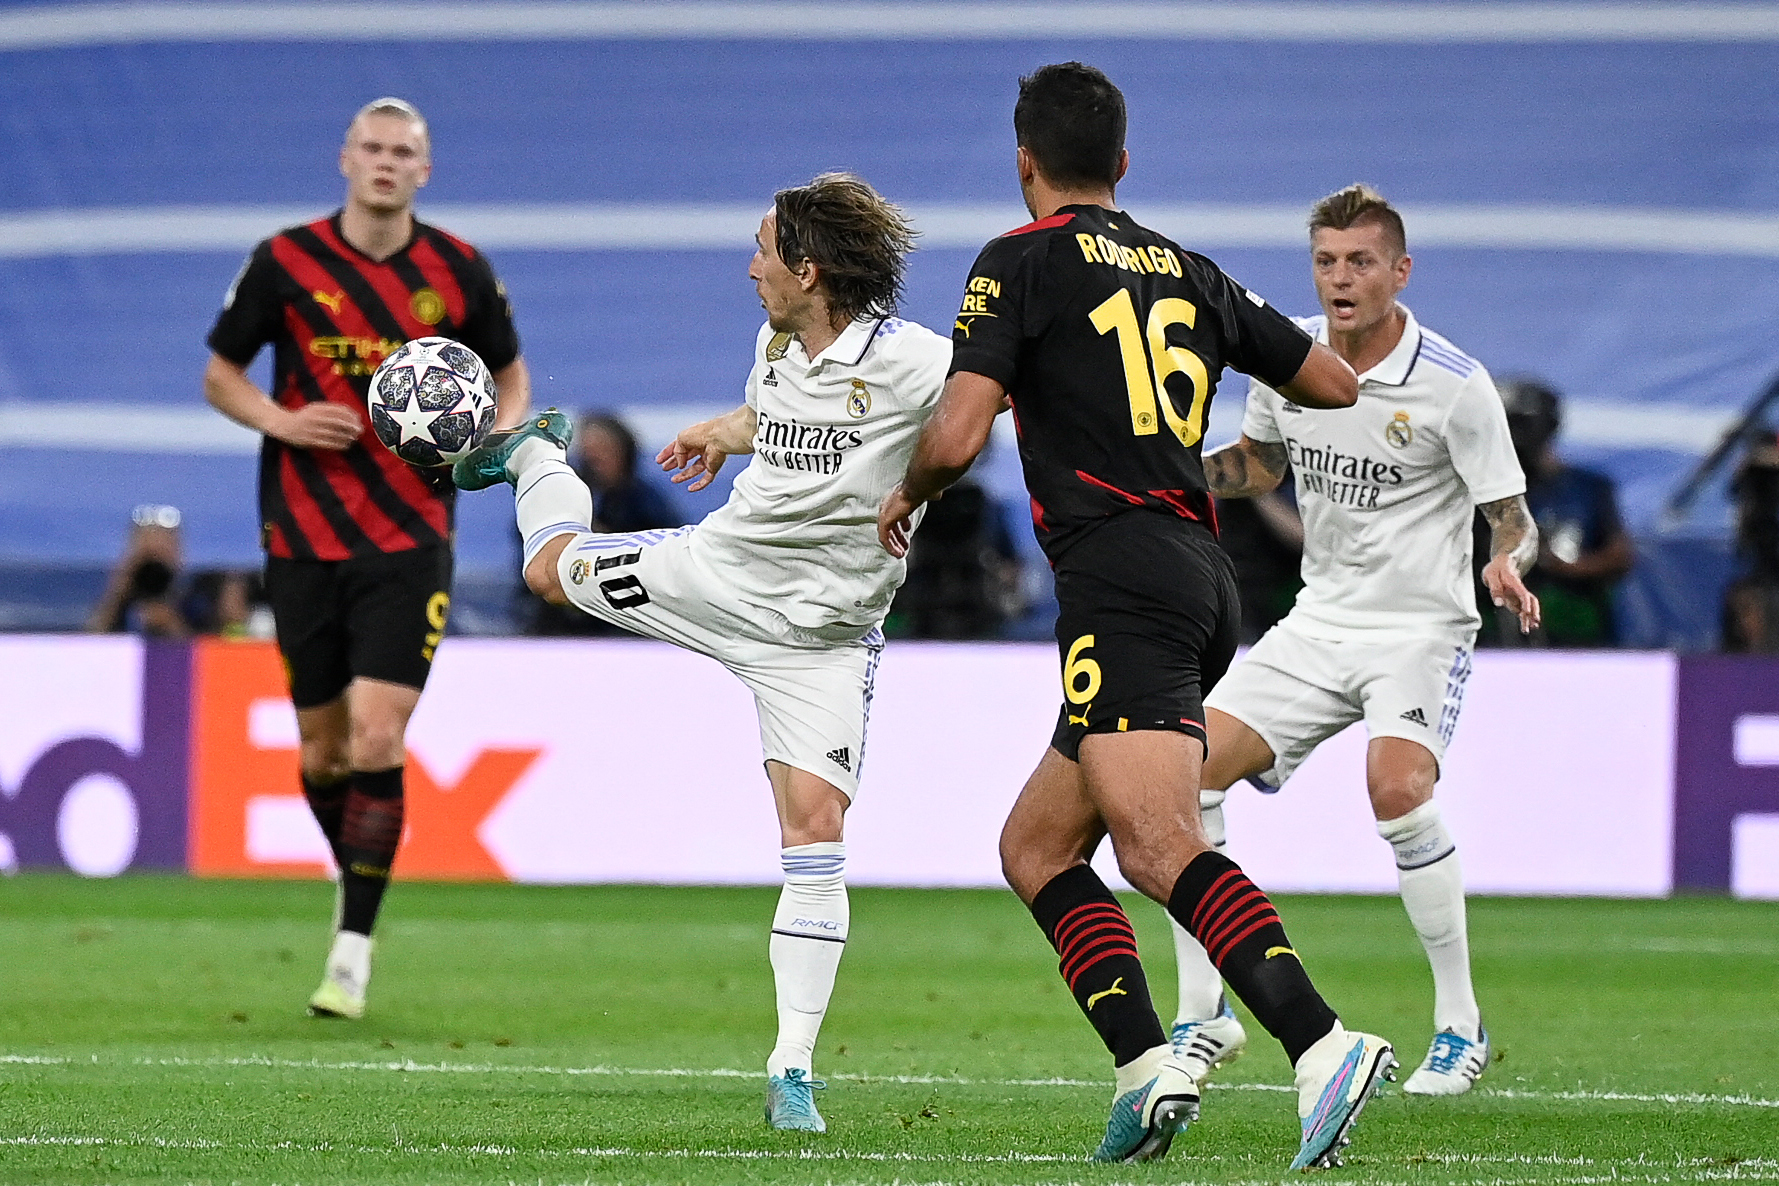 Real Madrid's Luka Modric, right, heads the ball past Manchester